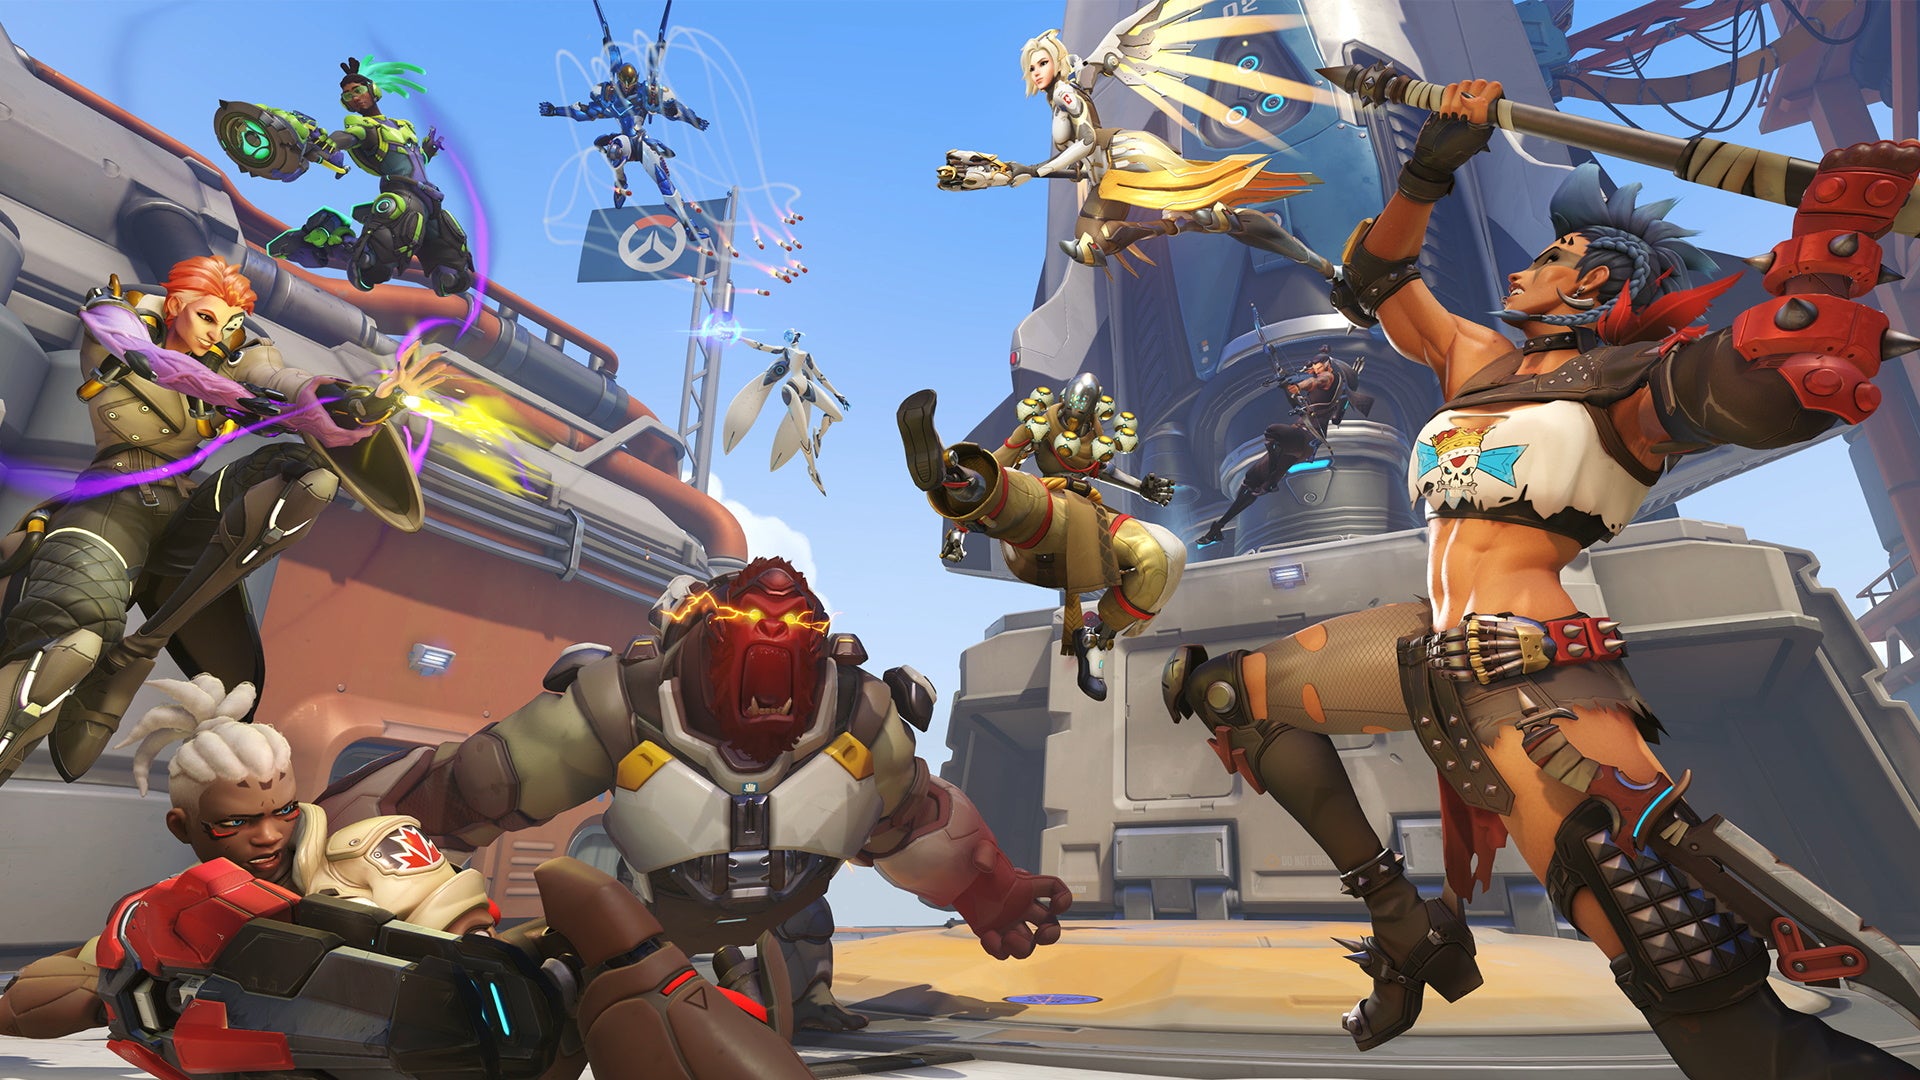 Image for Blizzard says Overwatch 2 servers experiencing "mass DDoS attack"